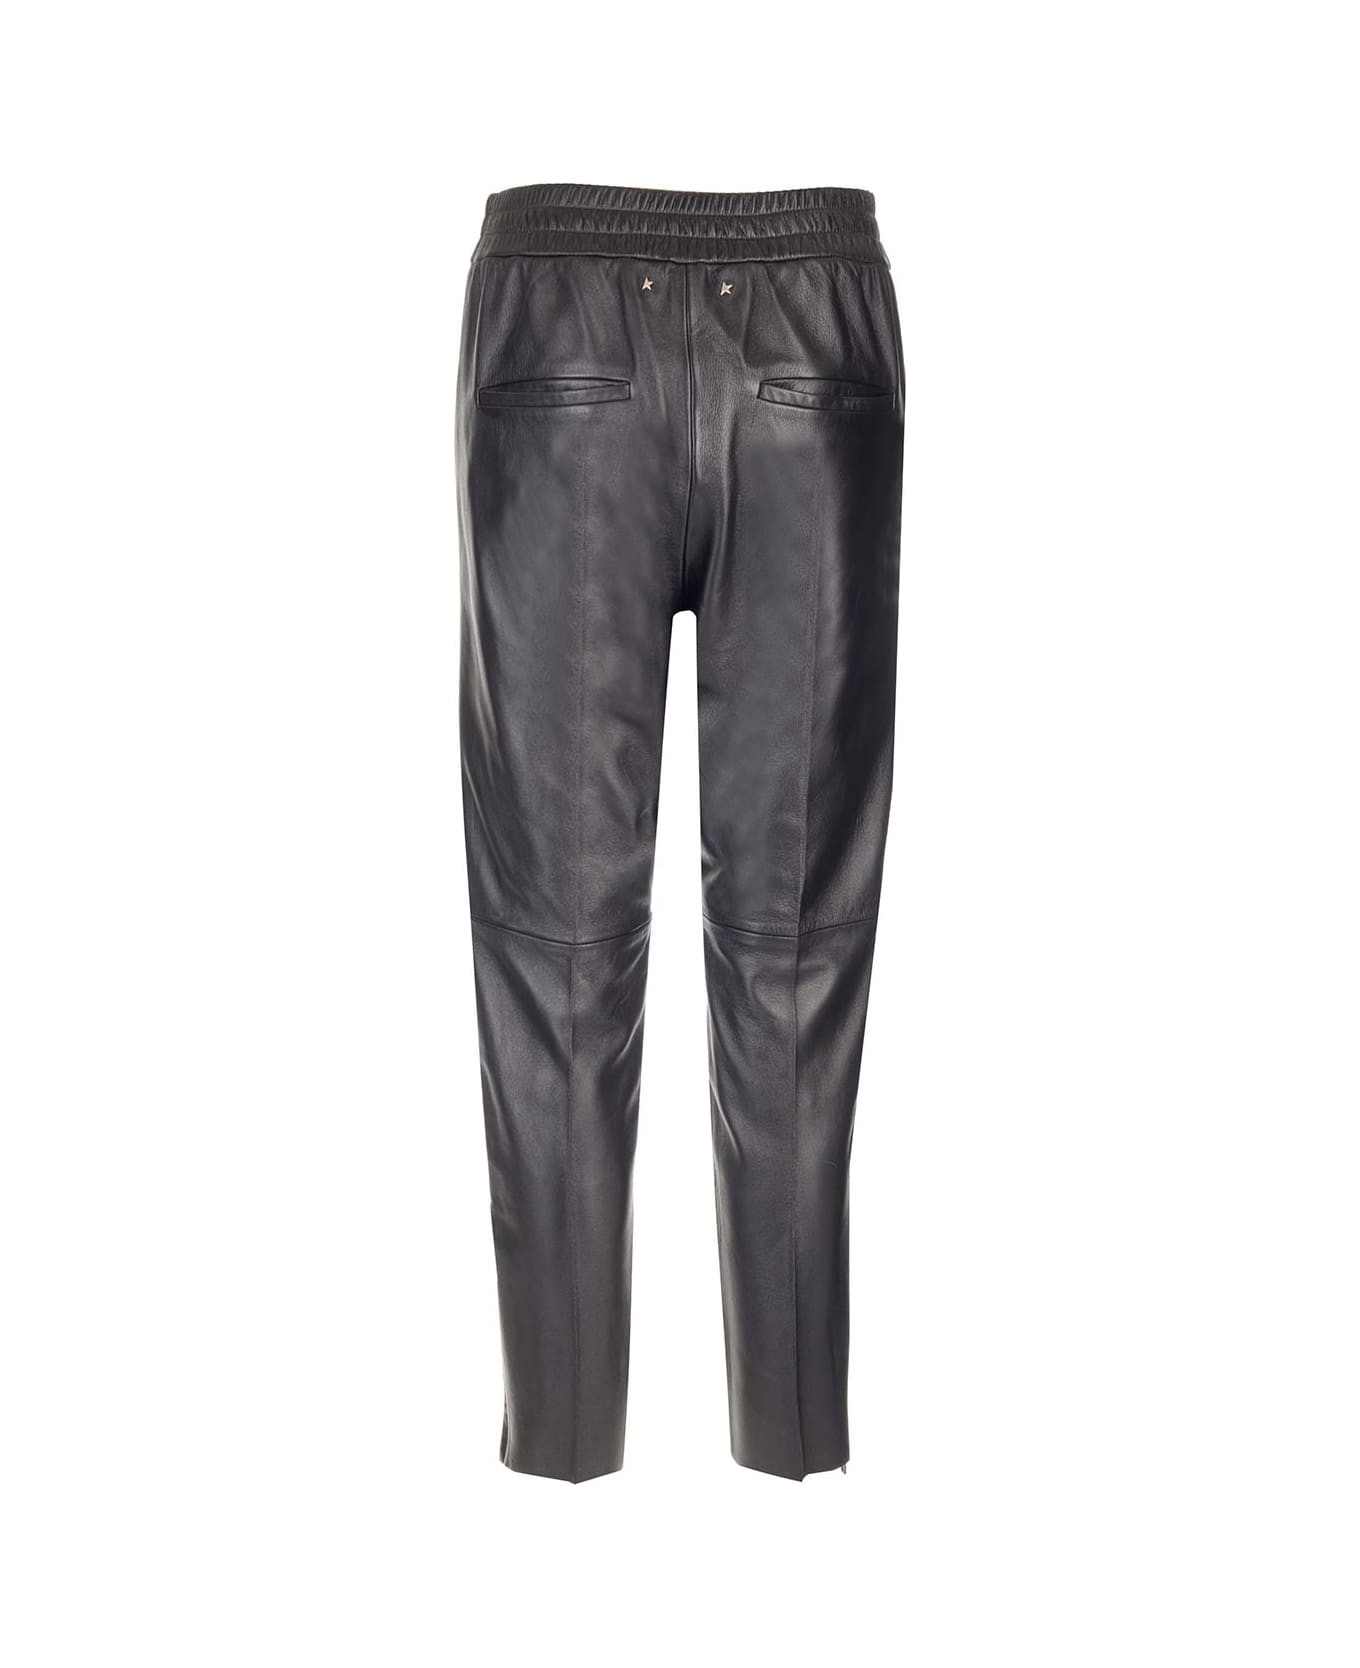 Golden Goose Leather Jogger Pants - BLACK ボトムス